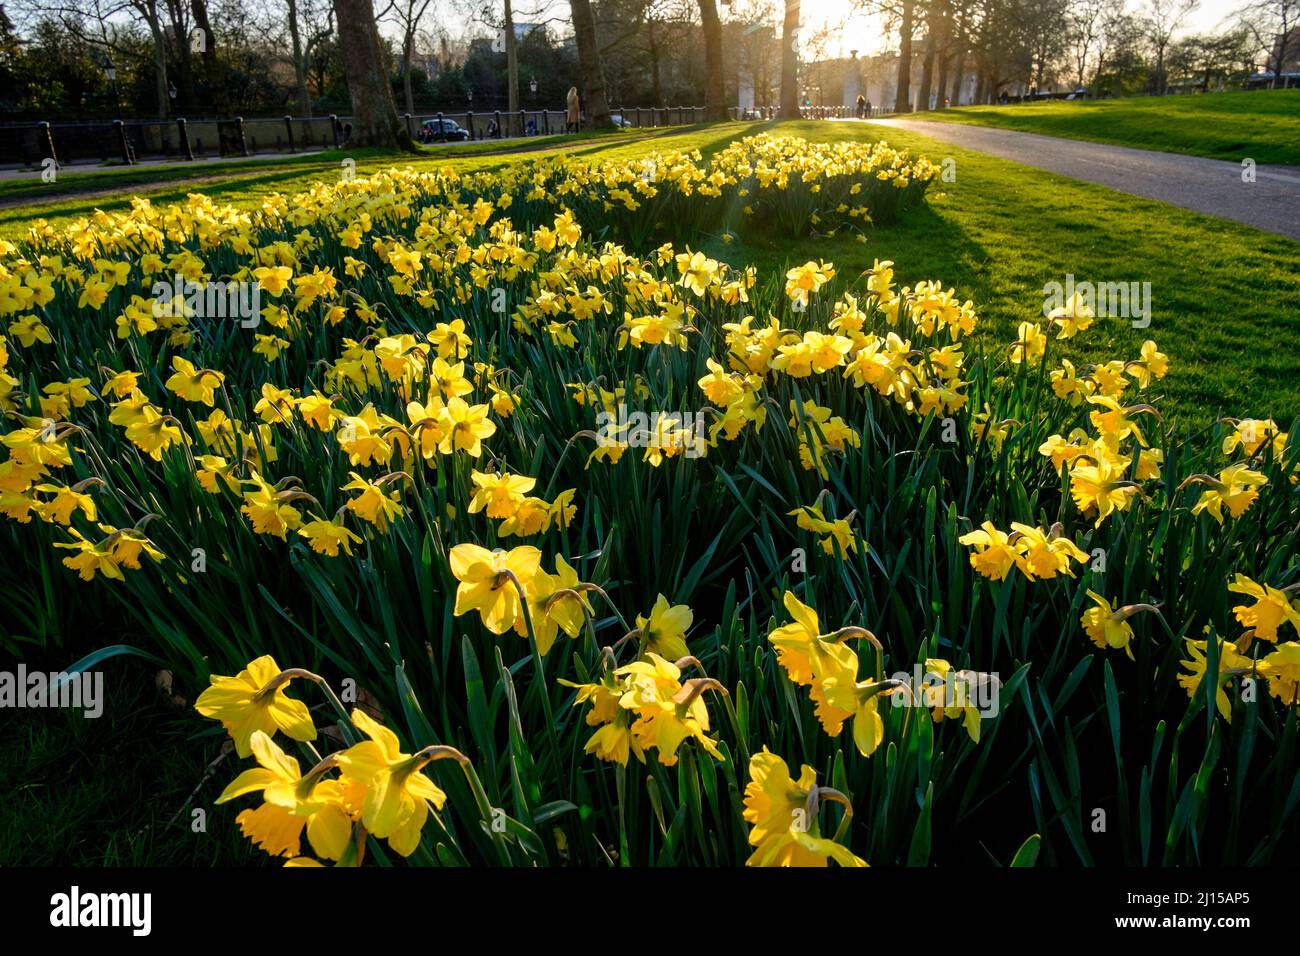 Daffodils in bloom in The Green Park, London, UK Stock Photo